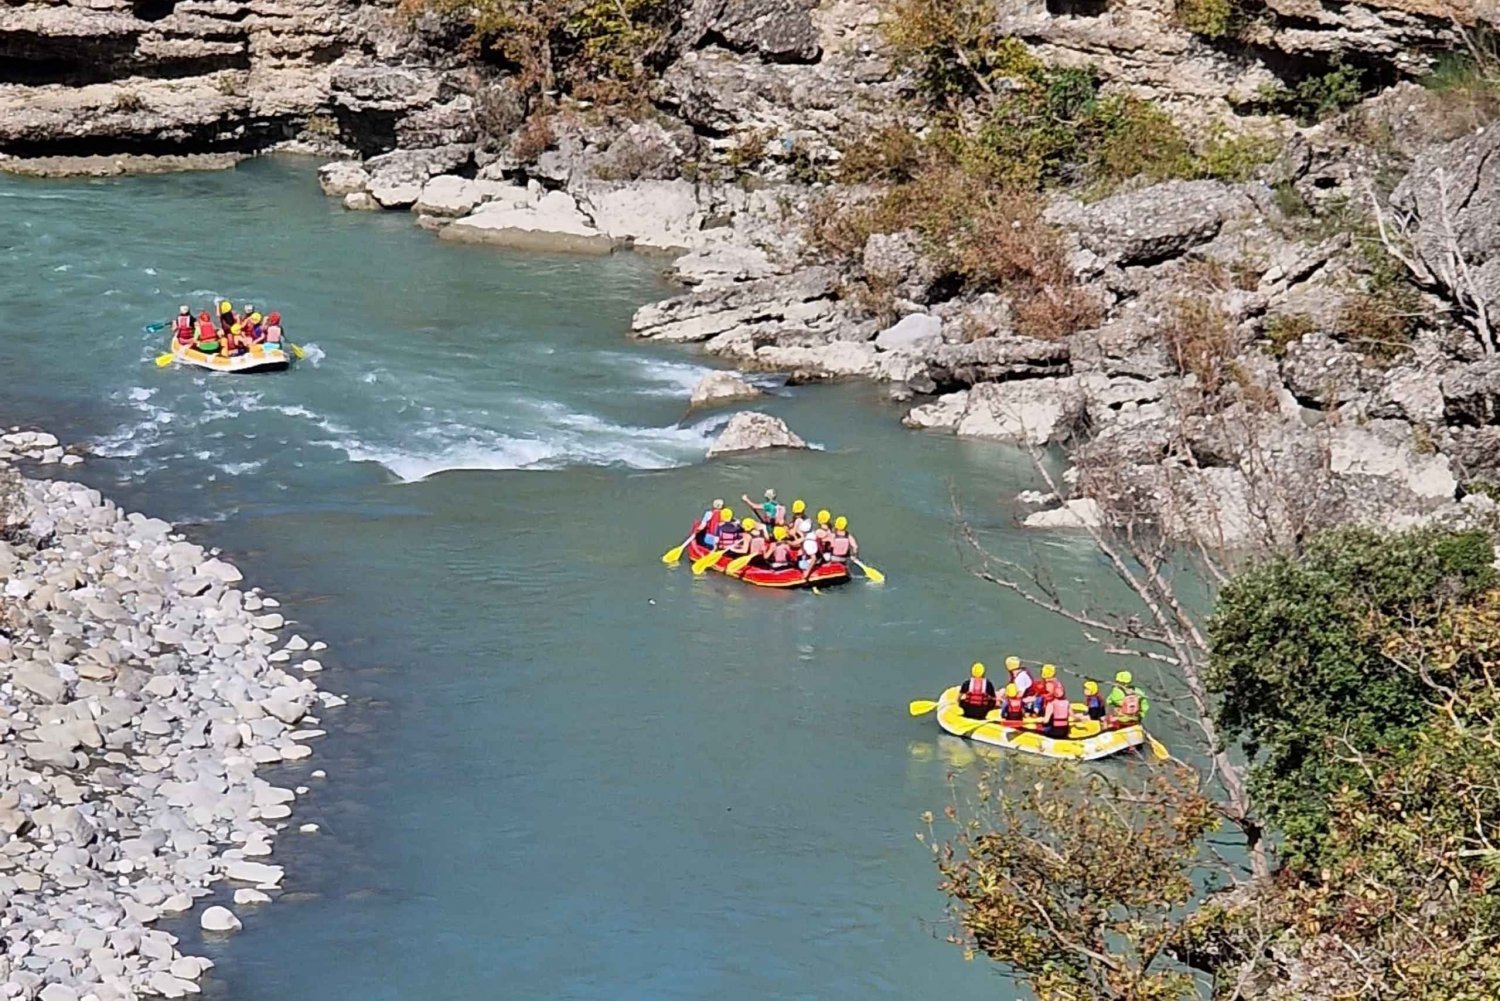 From Permet: Amazing Rafting Experience at Vjosa River